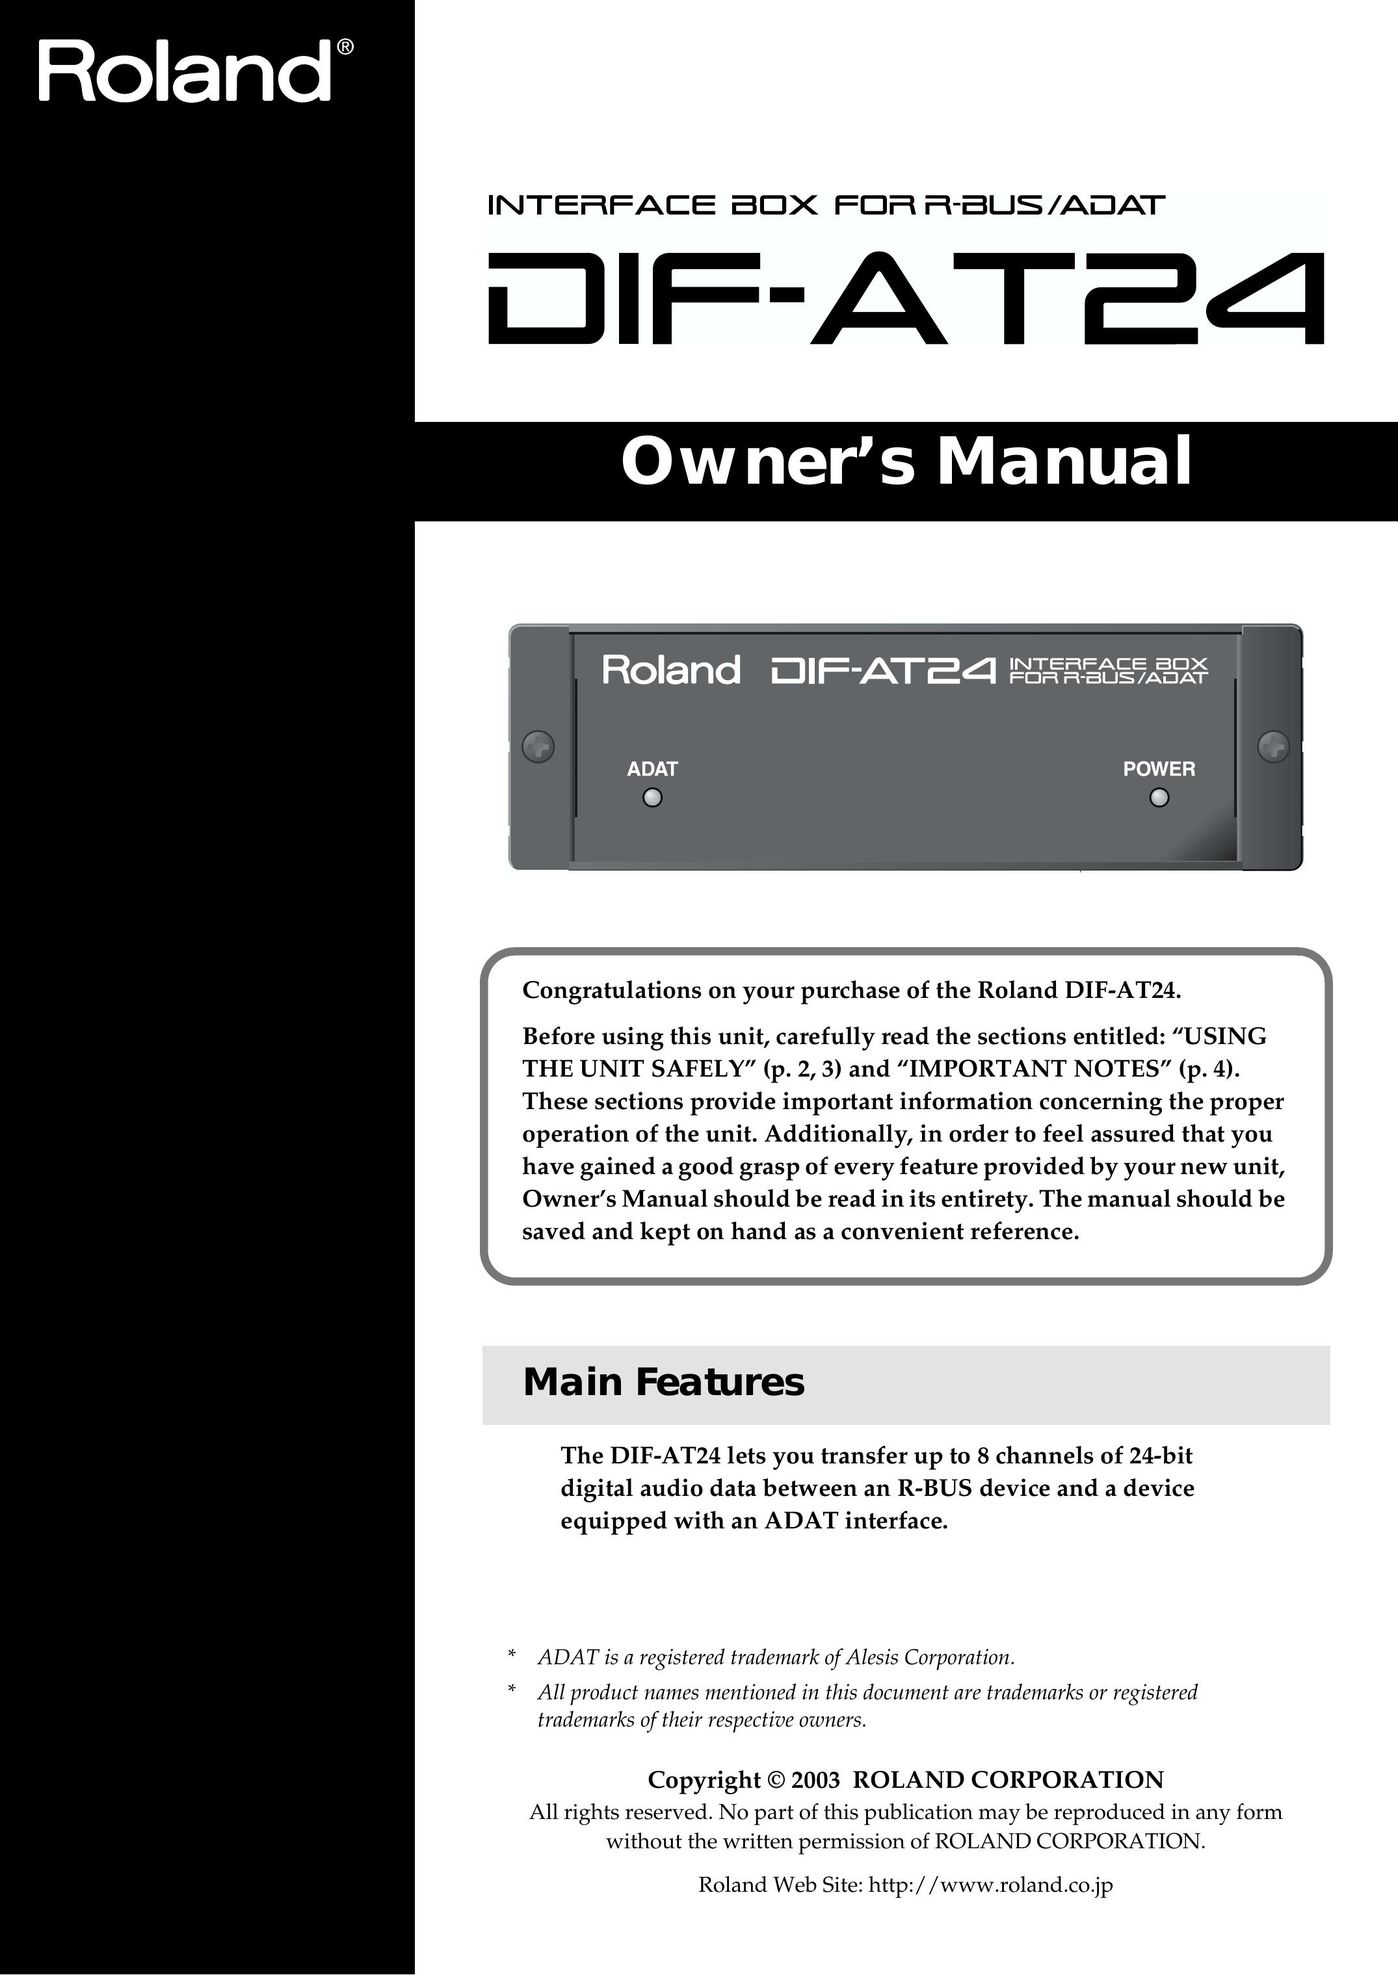 Roland DIF-AT24 Network Card User Manual